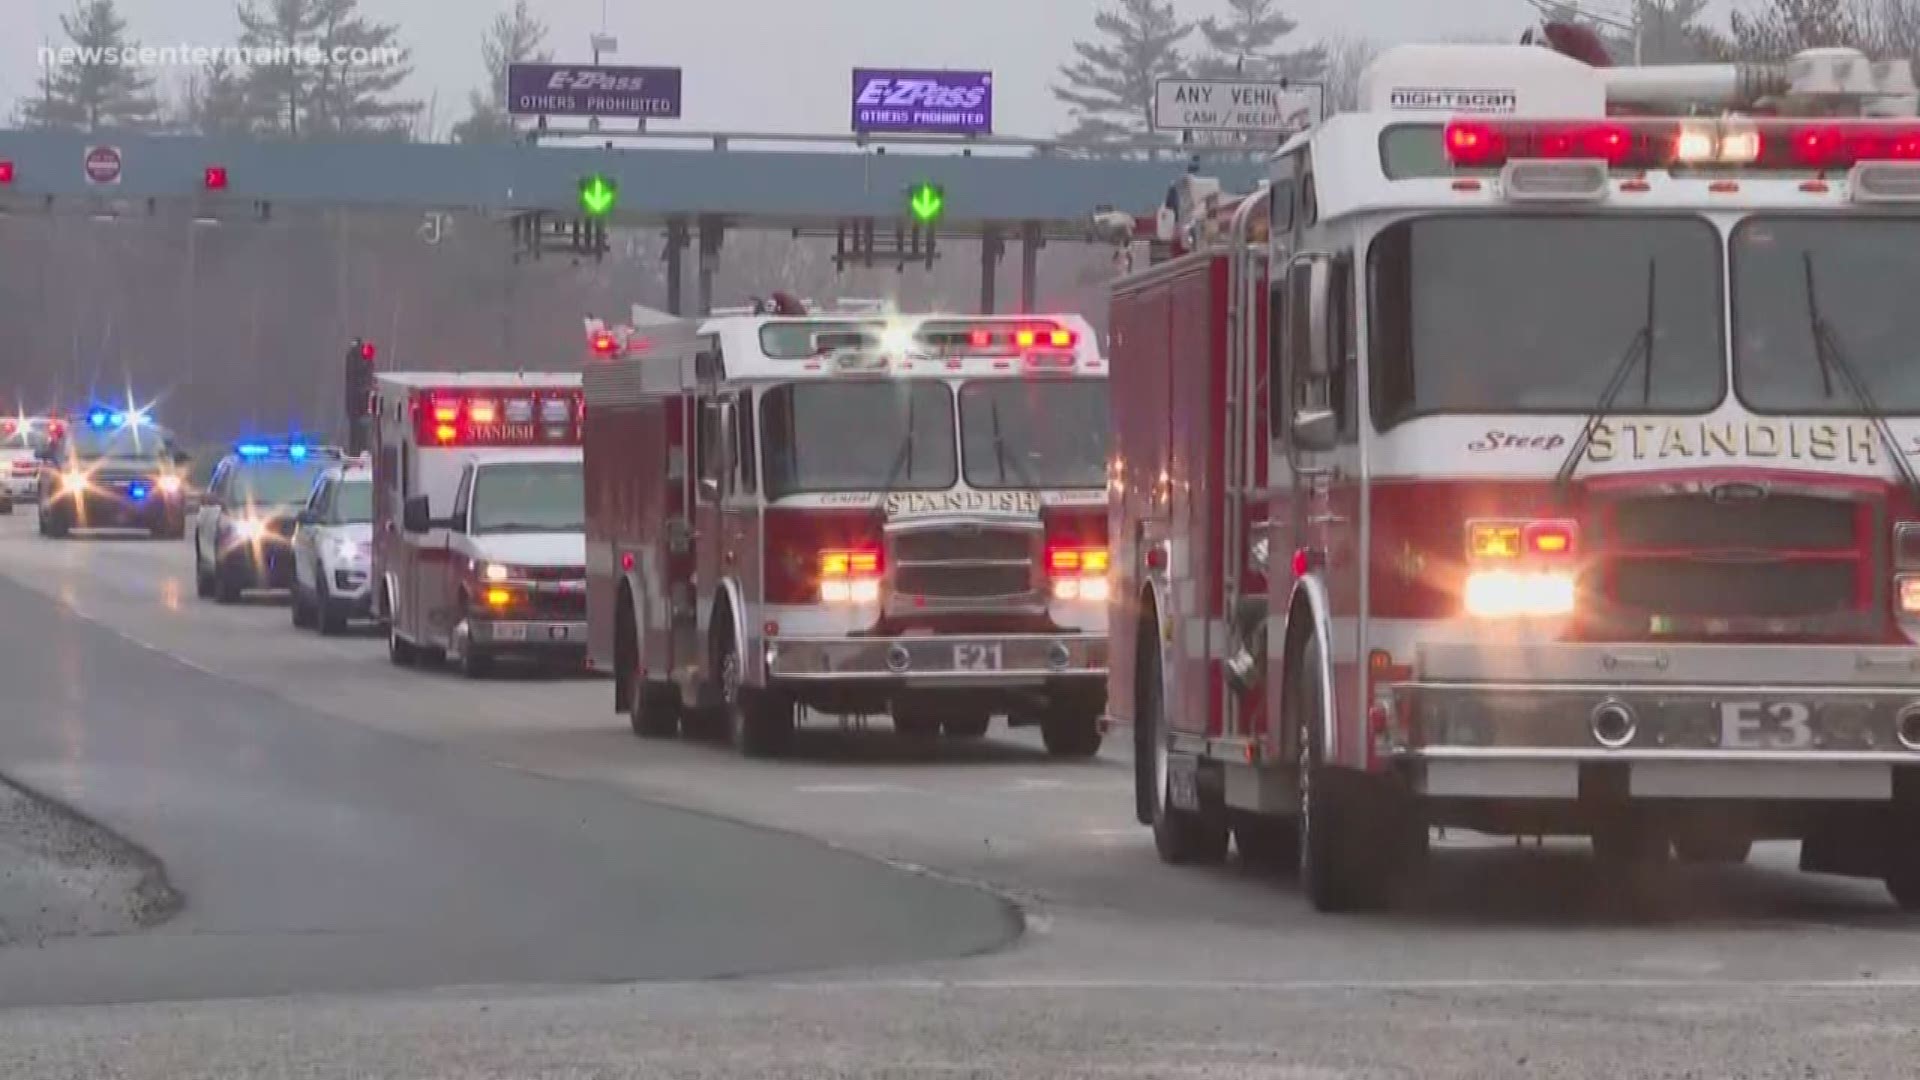 Welcoming home the body of Corporal Tyler Wallingford who was killed in South Carolina.